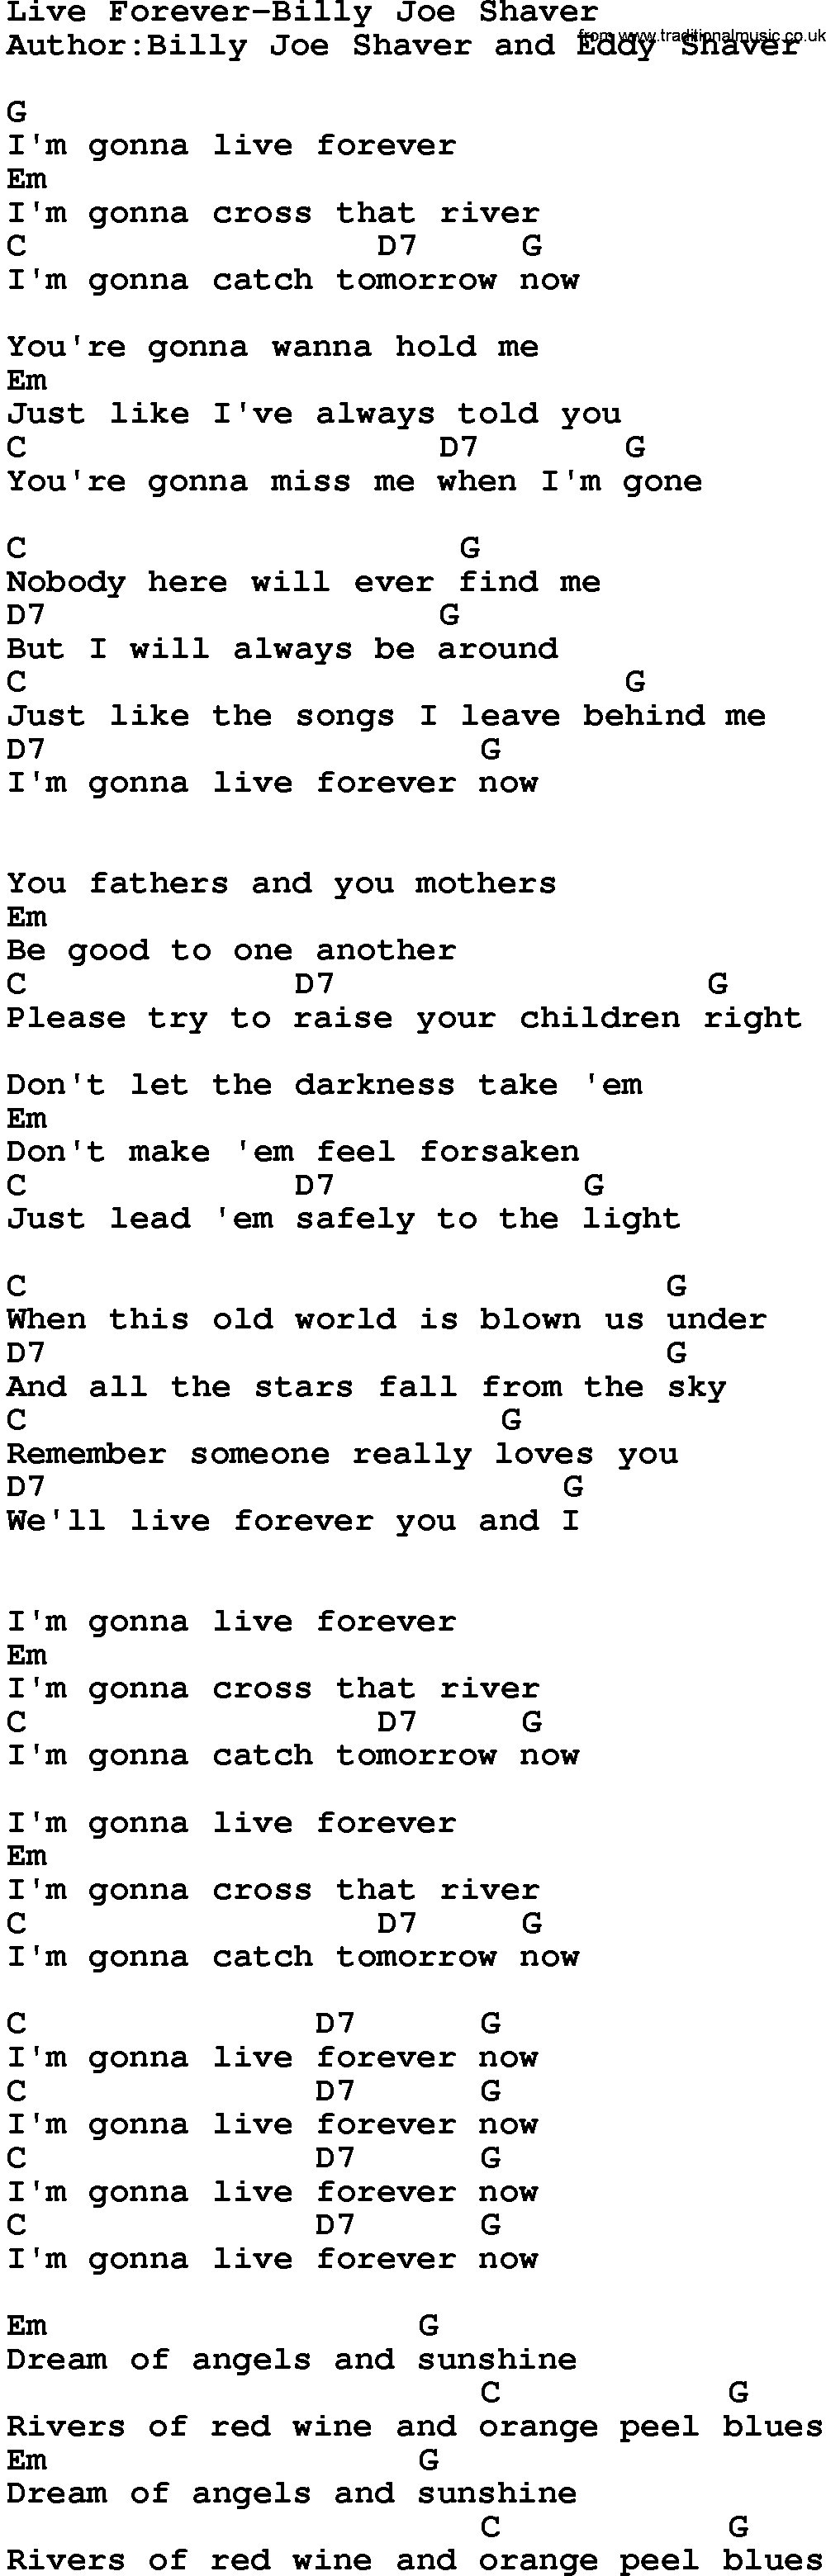 Country music song: Live Forever-Billy Joe Shaver lyrics and chords